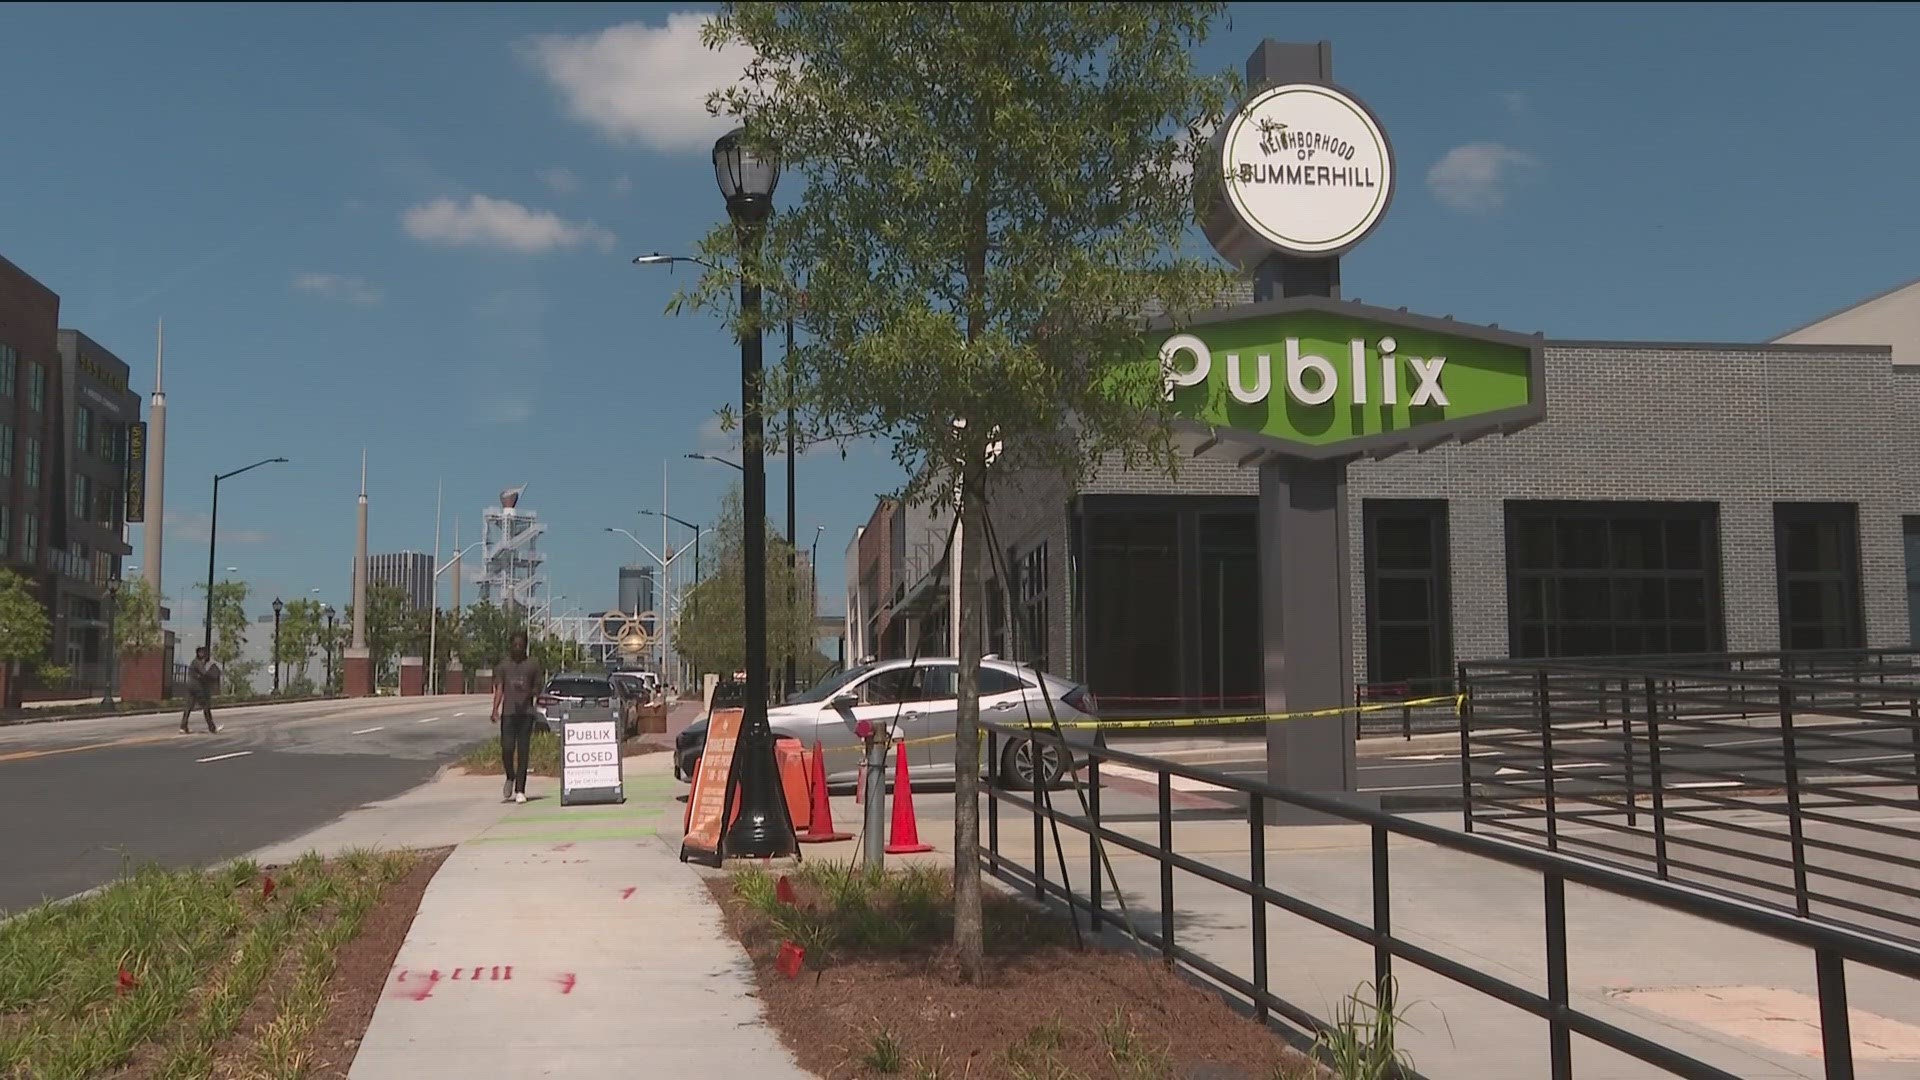 The department said a call came in around 7 a.m. for the Publix located at 572 Hank Aaron Drive in the southeast part of the city.